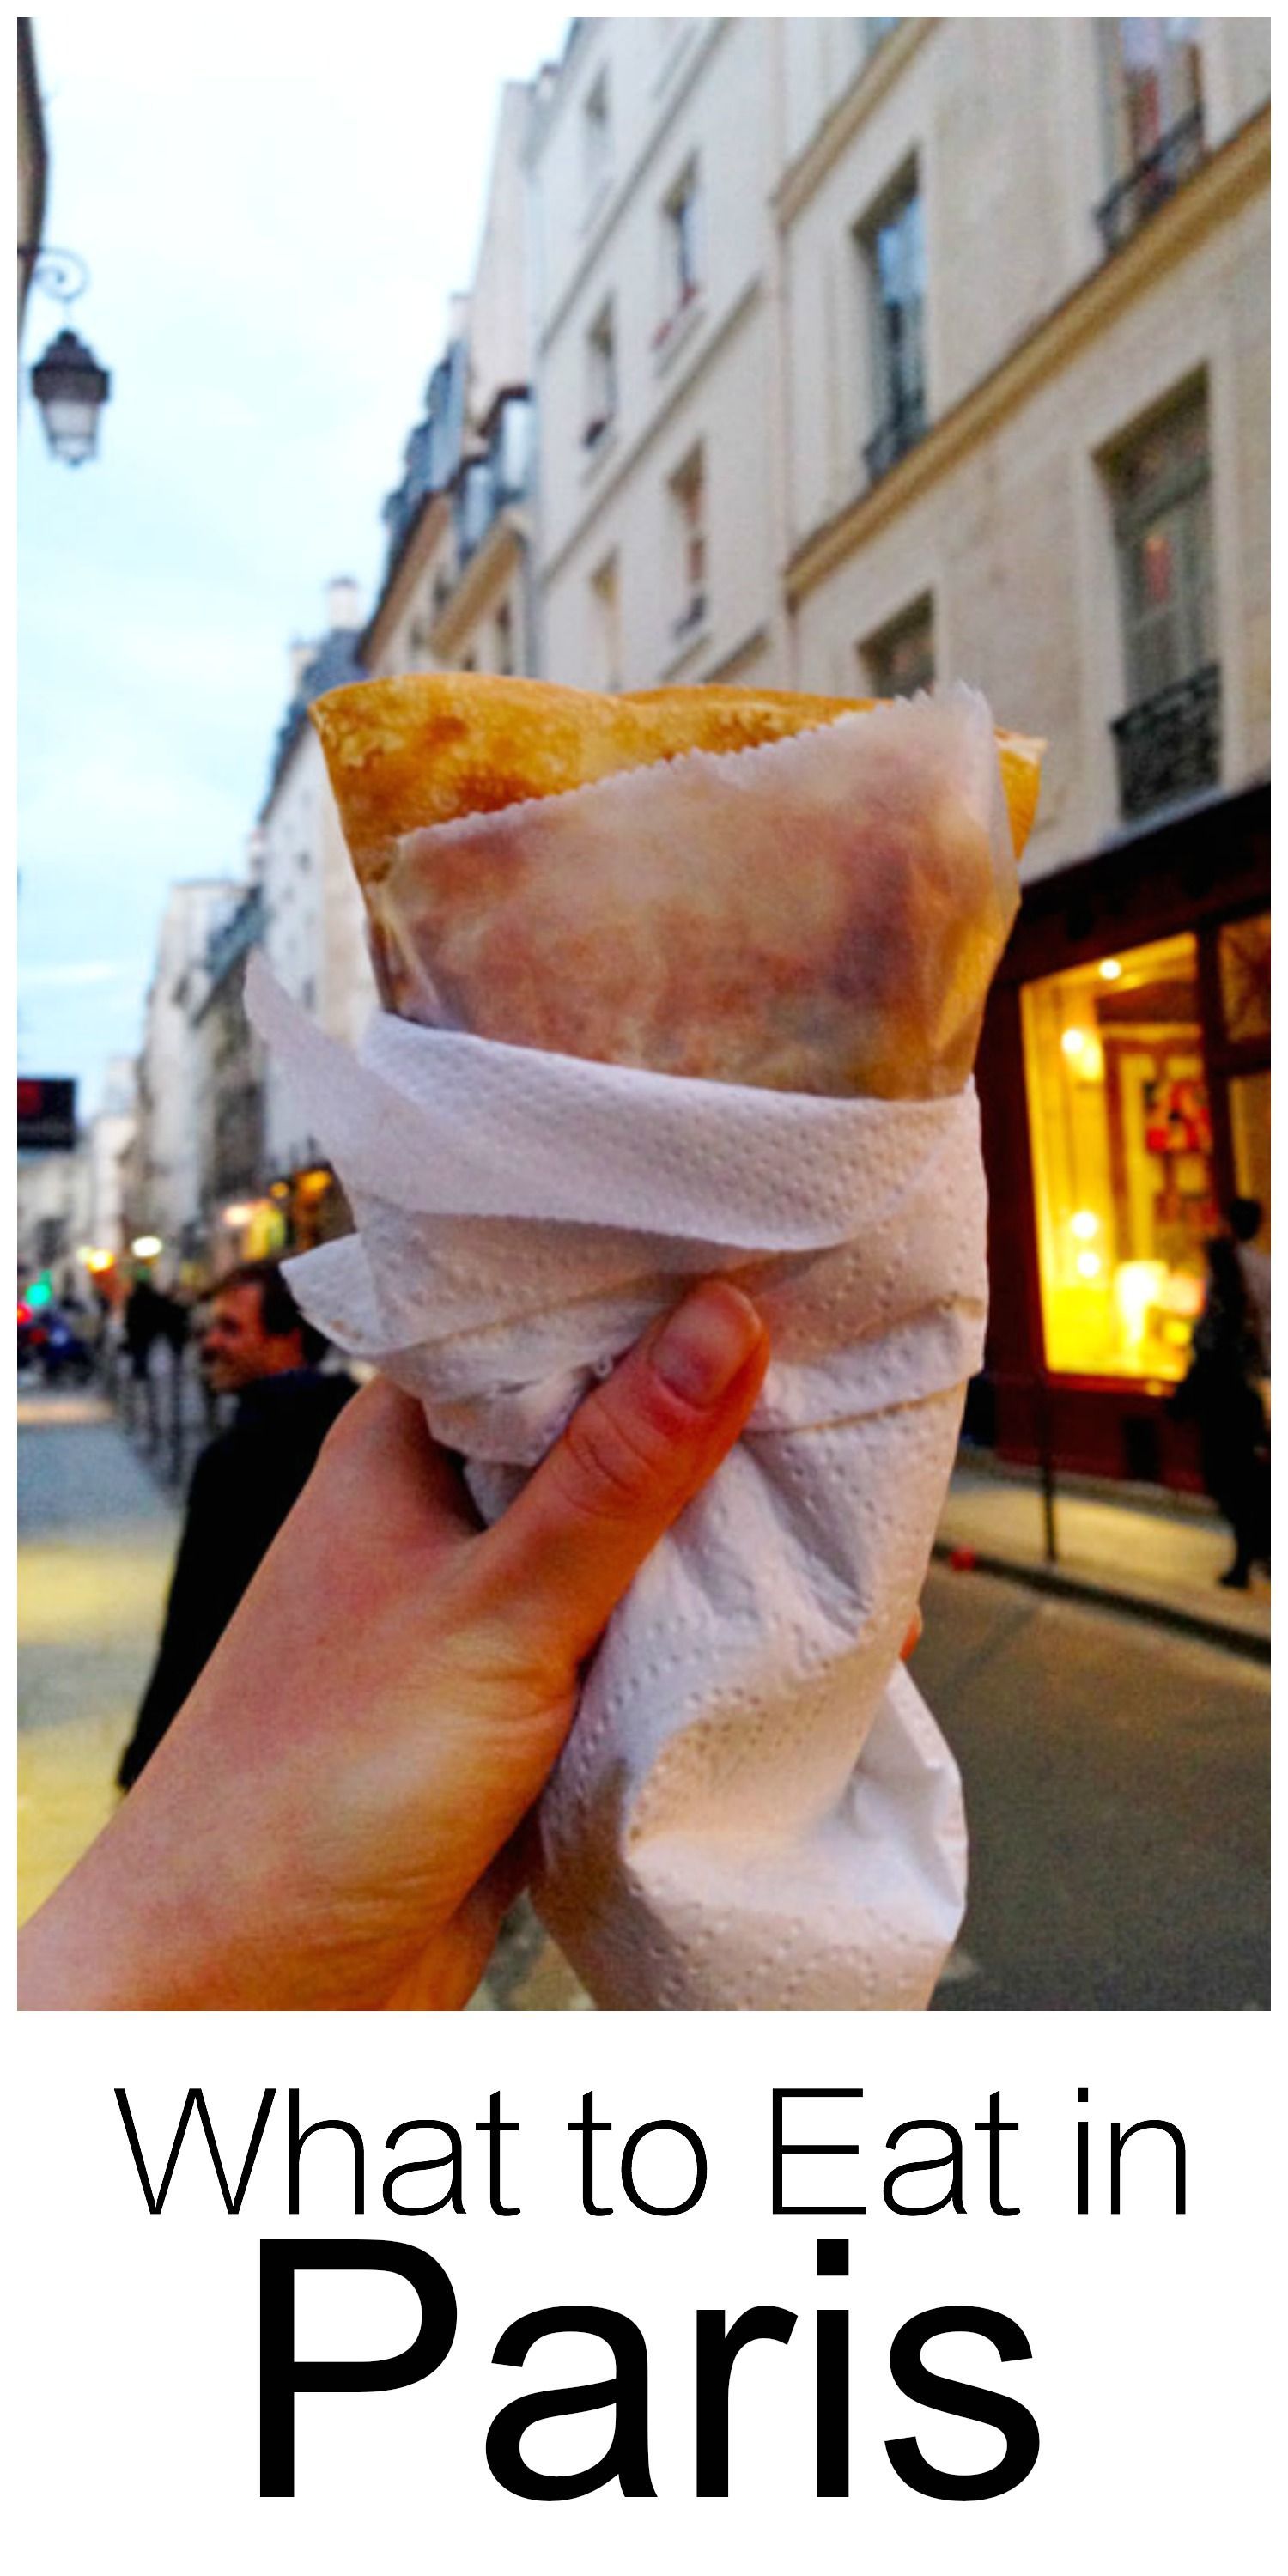 My favorite foods to eat in Paris ~ crepes, foie gras, cheese, crepes, pastries, fine dining and more. This is a great list if